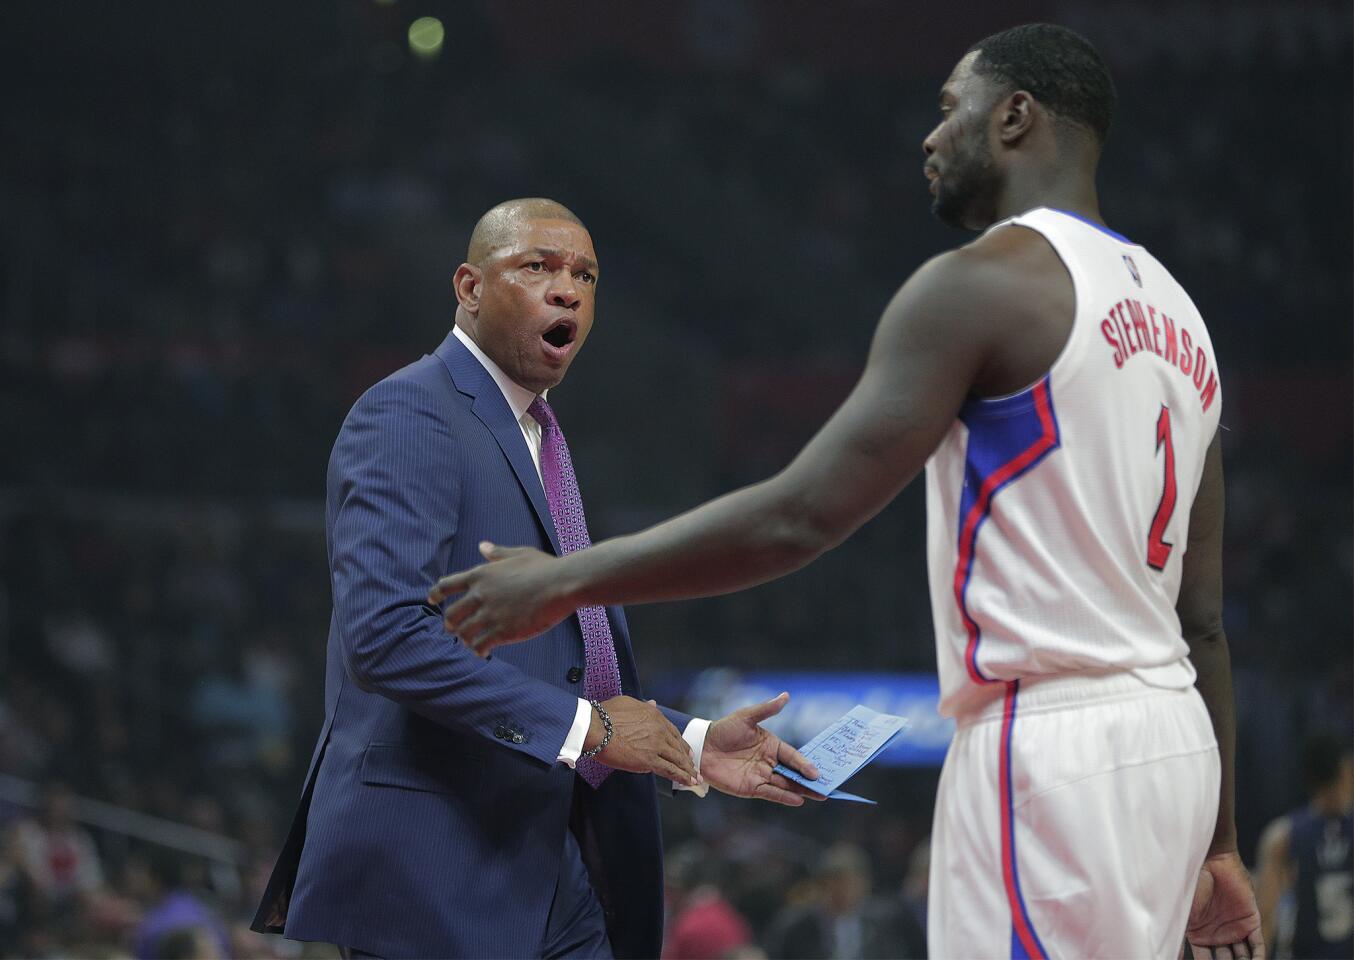 Clippers Coach Doc Rivers makes his point to forward Lance Stephenson after Stephenson missed a defensive assignment against the Grizzlies.